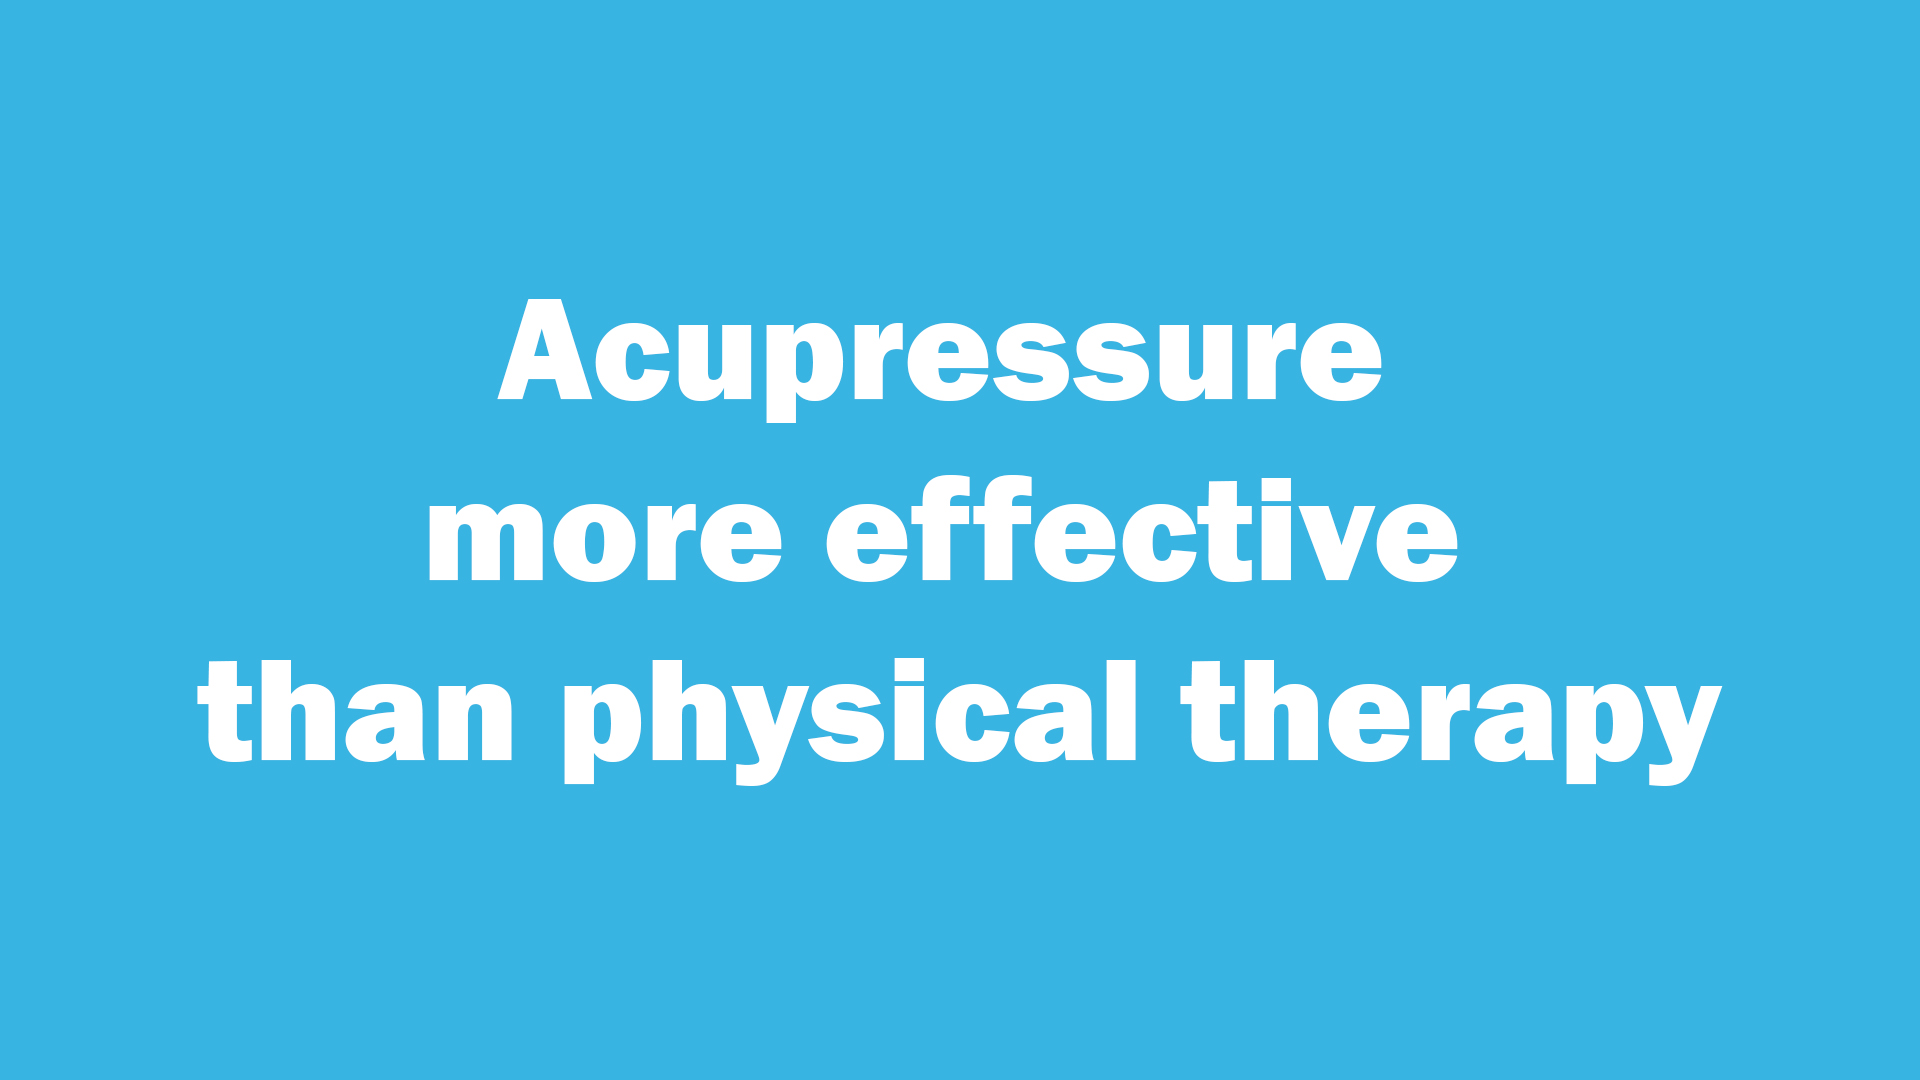 Acupressure more effective than physical therapy